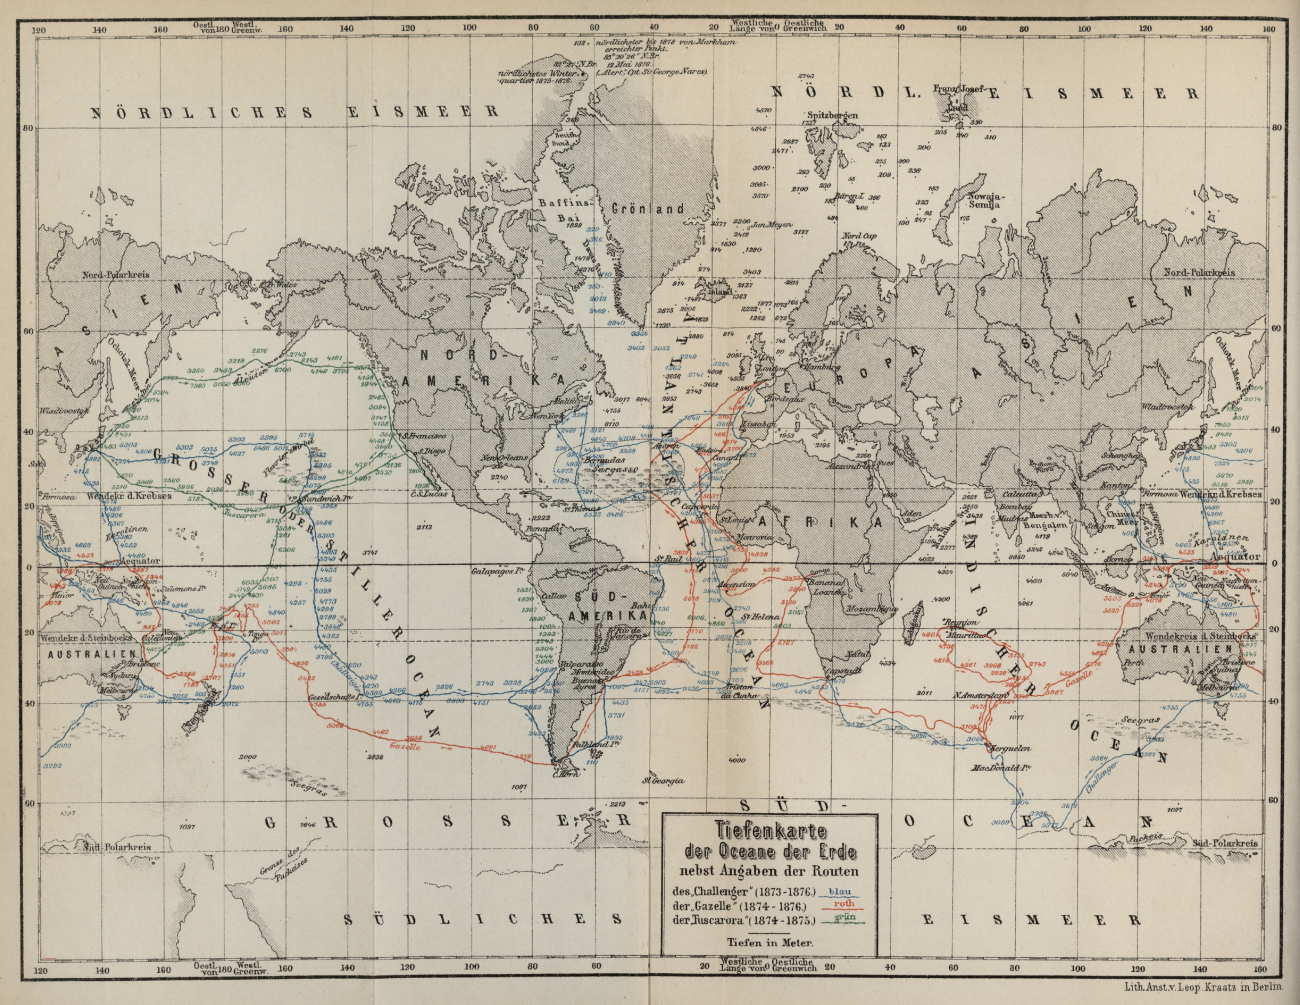 Map of deep sea expeditions by Dr